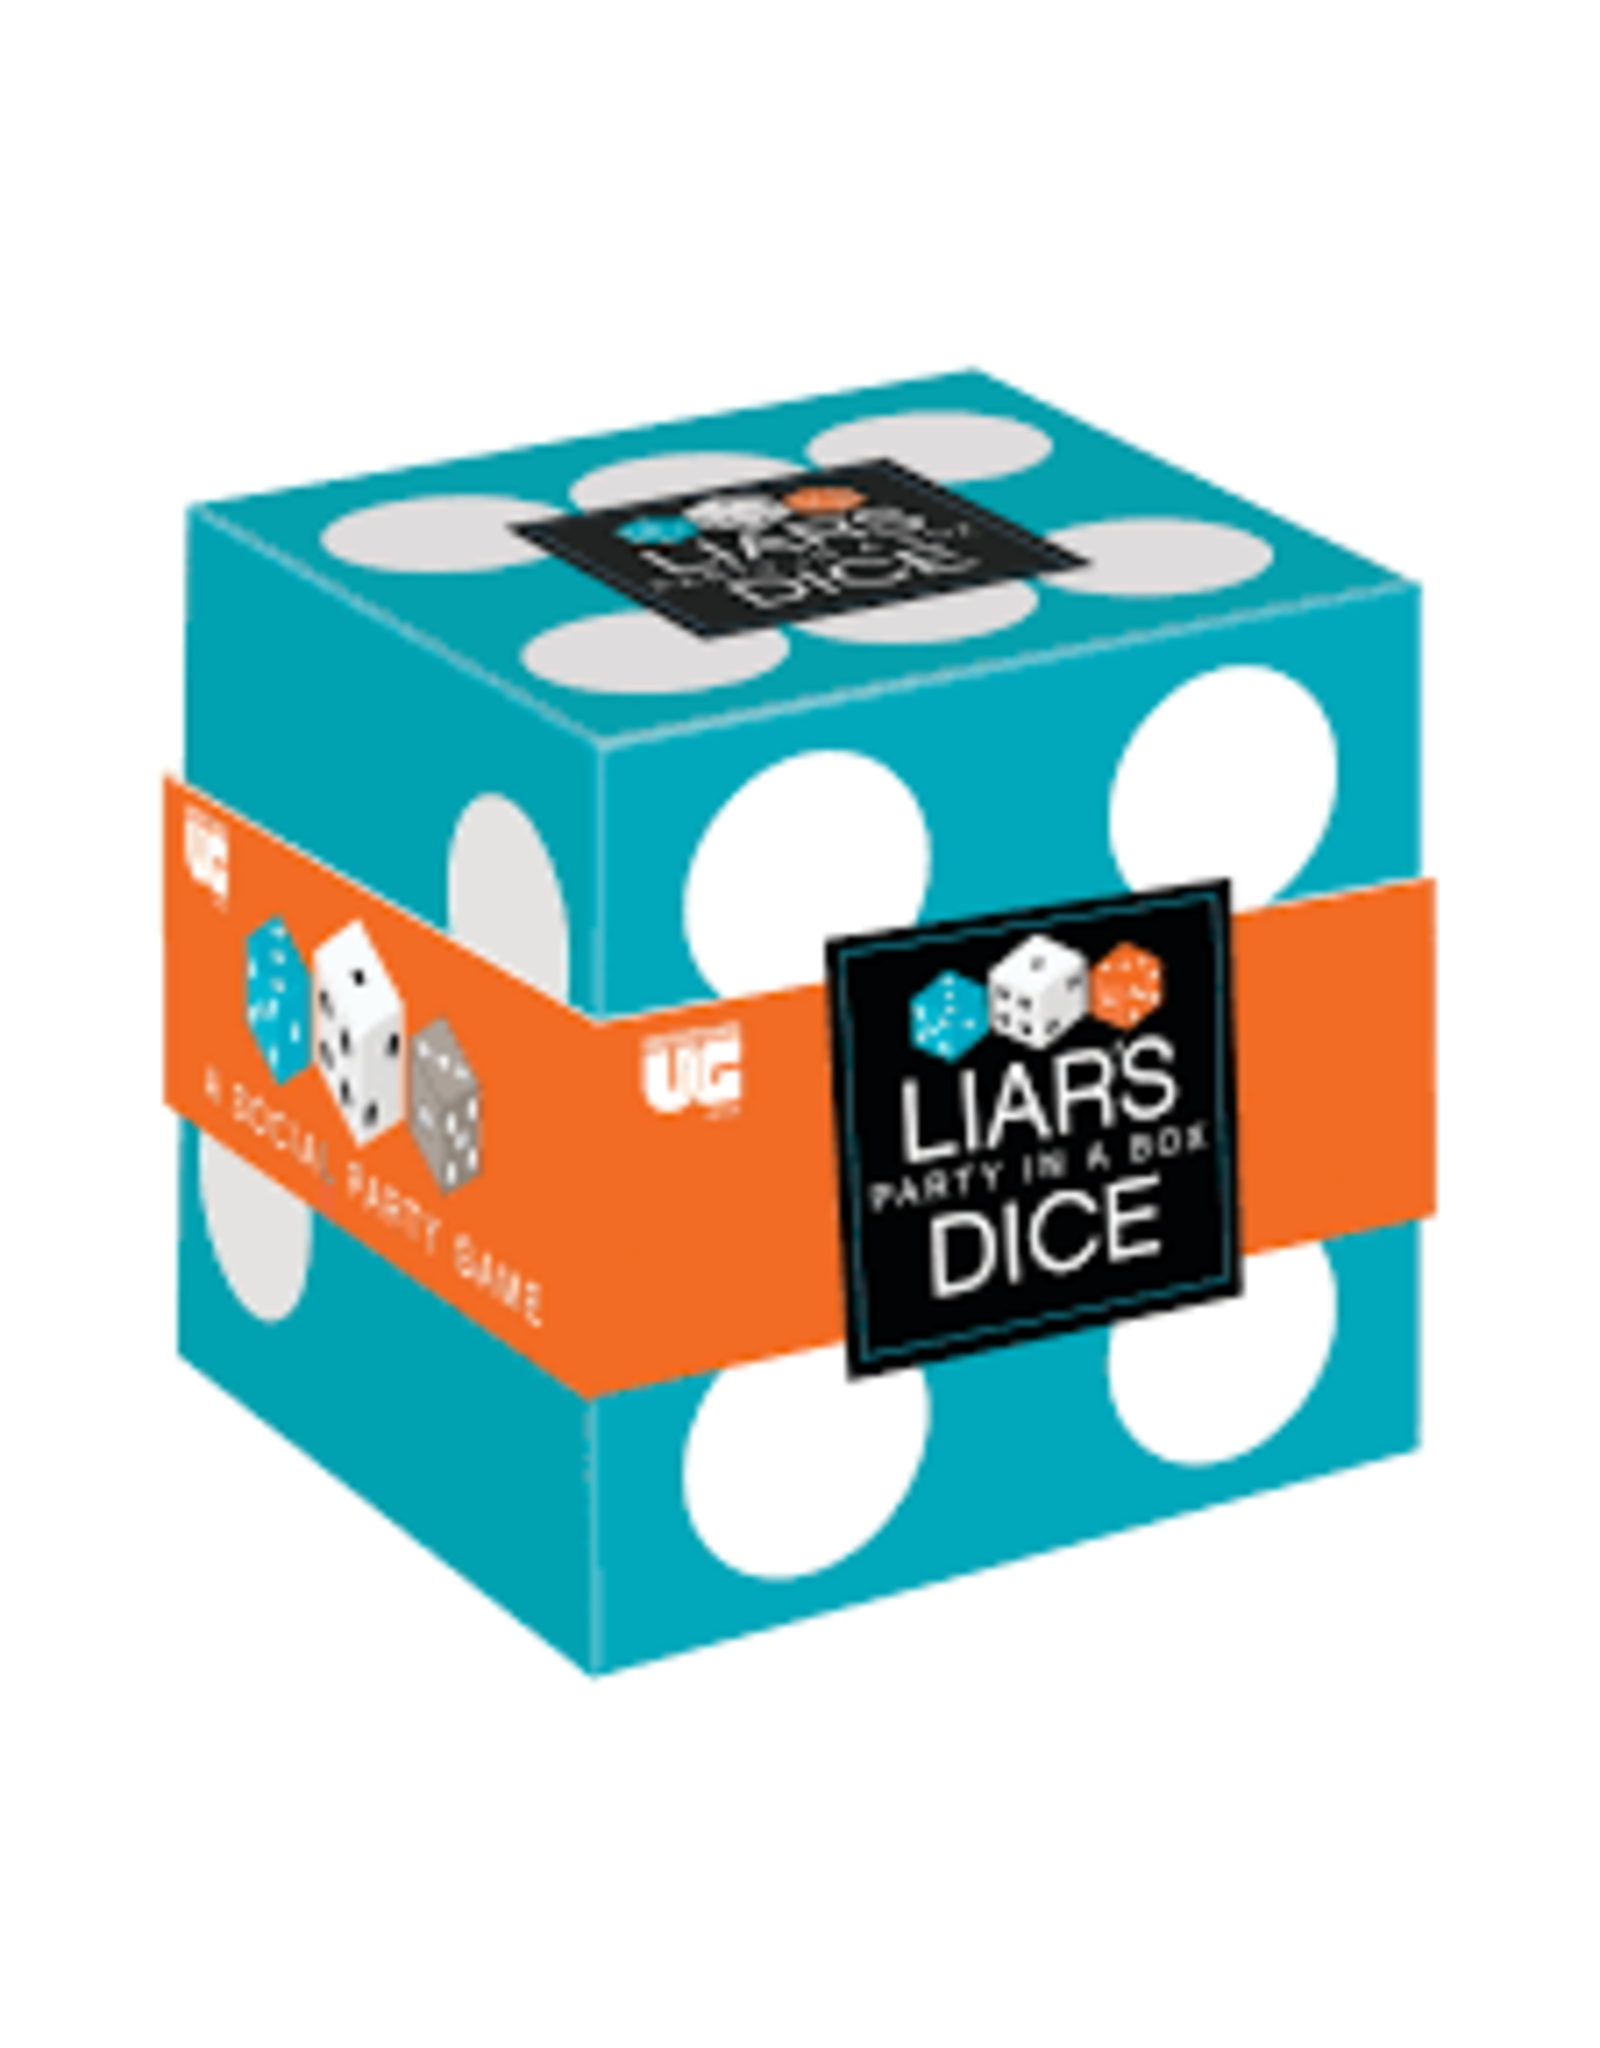 University Games Liar's Dice Party in a Box (Pre Order)